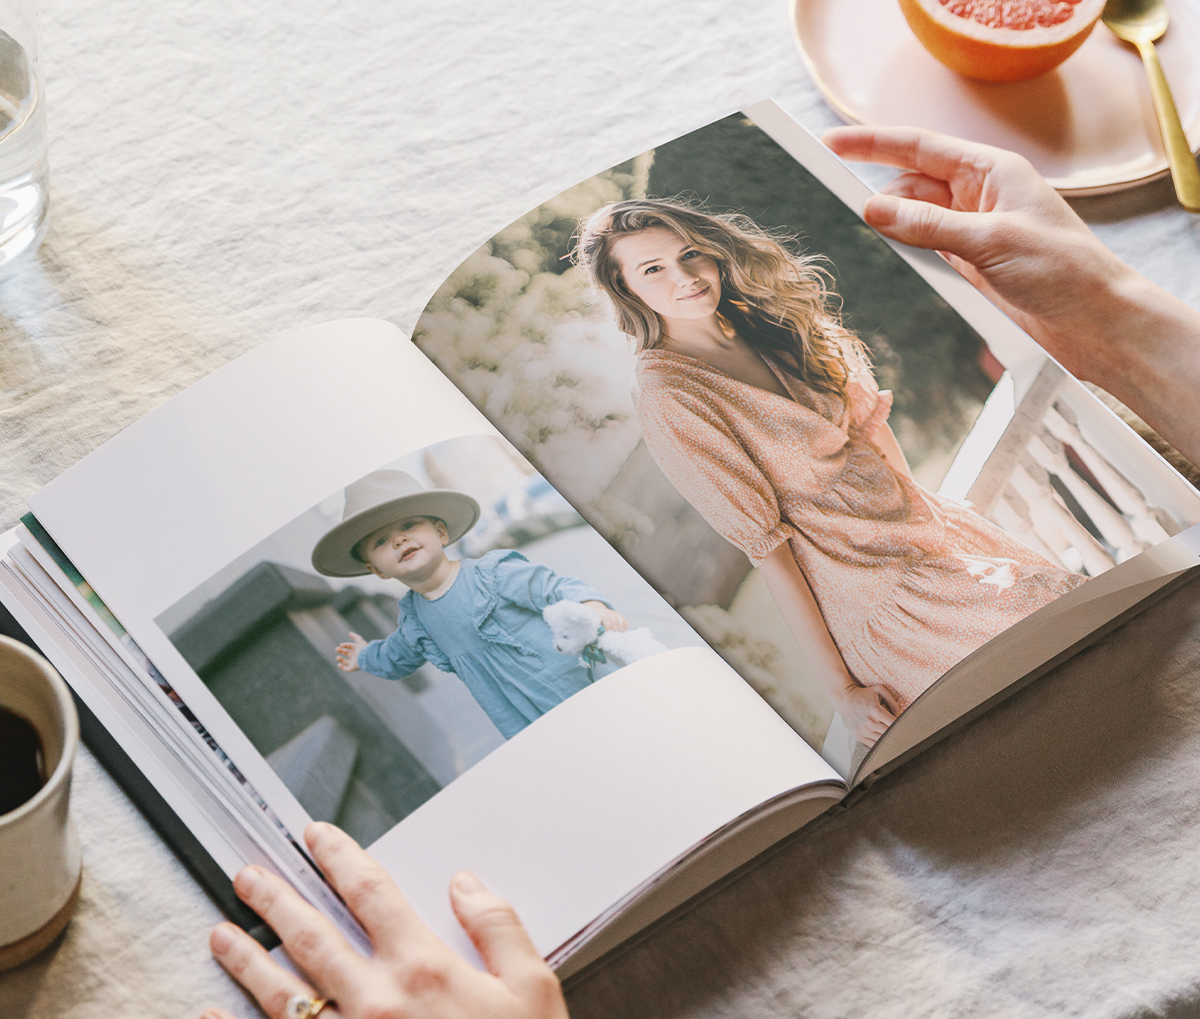 DIY Photo Book with 80 Pages Birthday Present ChangAn Photo Album to Design Yourself Wedding Anniversary Present Suitable as a Graduation Gift Valentine's Day Present